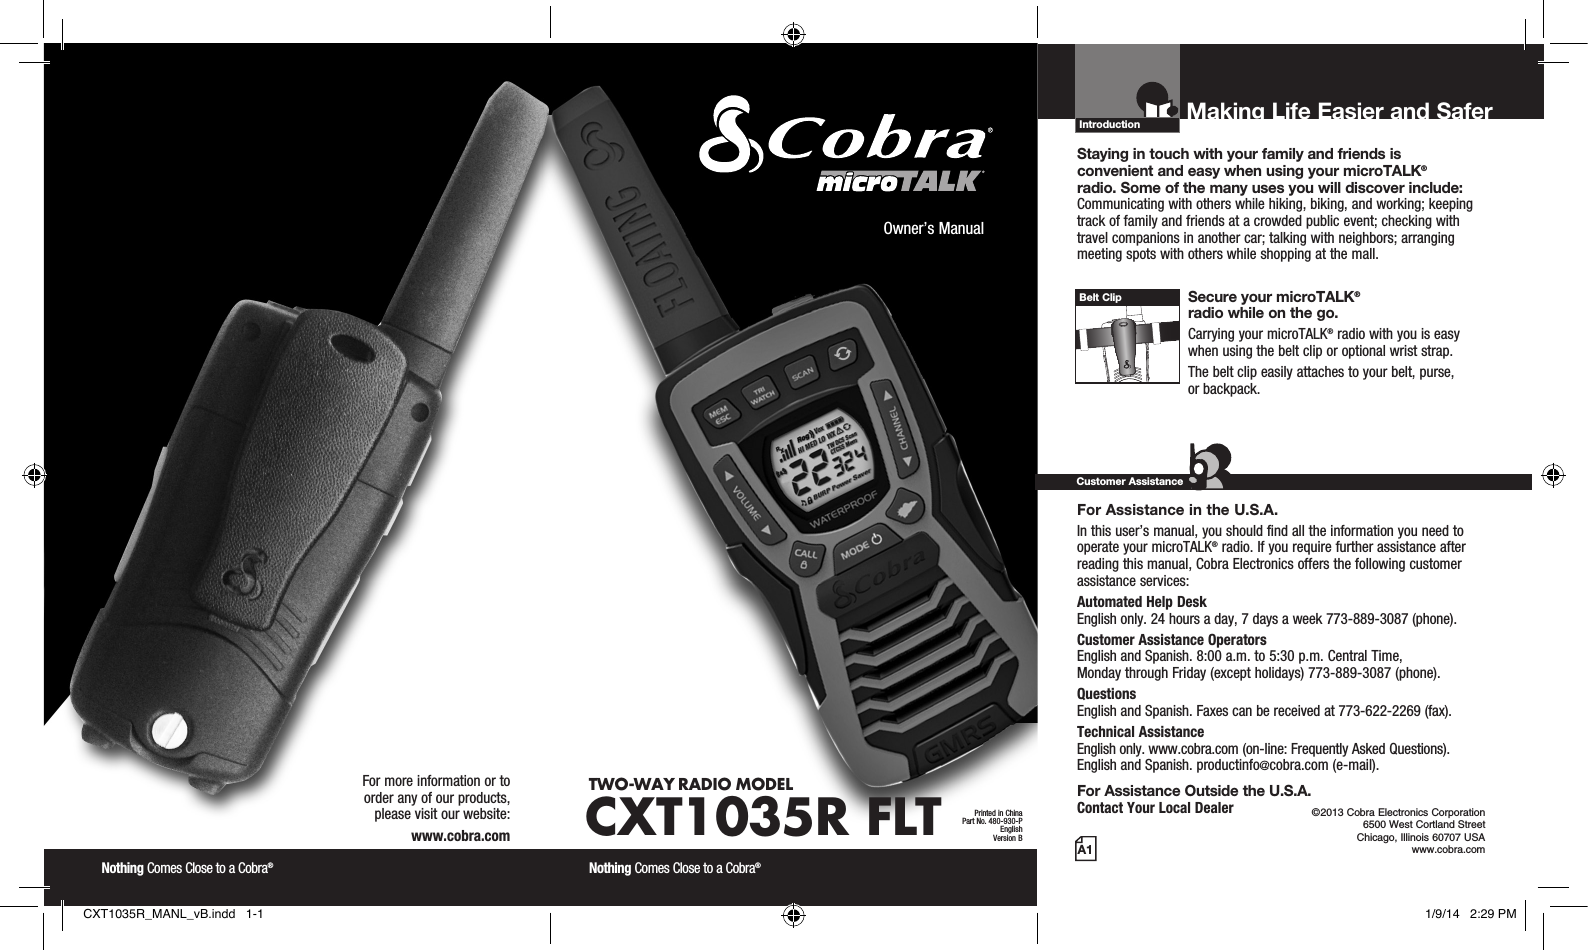 Introduction©2013 Cobra Electronics Corporation 6500 West Cortland Street Chicago, Illinois 60707 USAwww.cobra.comMaking Life Easier and Safer Staying in touch with your family and friends is  convenient and easy when using your microTALK®  radio. Some of the many uses you will discover include:Communicating with others while hiking, biking, and working; keeping track of family and friends at a crowded public event; checking with travel companions in another car; talking with neighbors; arranging meeting spots with others while shopping at the mall. Secure your microTALK®  radio while on the go.Carrying your microTALK® radio with you is easy when using the belt clip or optional wrist strap. The belt clip easily attaches to your belt, purse,  or backpack.For Assistance in the U.S.A. In this user’s manual, you should find all the information you need to operate your microTALK® radio. If you require further assistance after reading this manual, Cobra Electronics offers the following customer assistance services:Automated Help Desk  English only. 24 hours a day, 7 days a week 773-889-3087 (phone). Customer Assistance Operators  English and Spanish. 8:00 a.m. to 5:30 p.m. Central Time,  Monday through Friday (except holidays) 773-889-3087 (phone). Questions  English and Spanish. Faxes can be received at 773-622-2269 (fax). Technical Assistance  English only. www.cobra.com (on-line: Frequently Asked Questions).  English and Spanish. productinfo@cobra.com (e-mail).For Assistance Outside the U.S.A. Contact Your Local DealerCustomer AssistanceA1Owner’s ManualNothing Comes Close to a Cobra® Nothing Comes Close to a Cobra® For more information or to  order any of our products,  please visit our website:www.cobra.comBelt ClipPrinted in ChinaPart No. 480-930-PEnglishVersion BTWO-WAY RADIO  MODEL CXT1035R FLTCXT1035R_MANL_vB.indd   1-1 1/9/14   2:29 PM